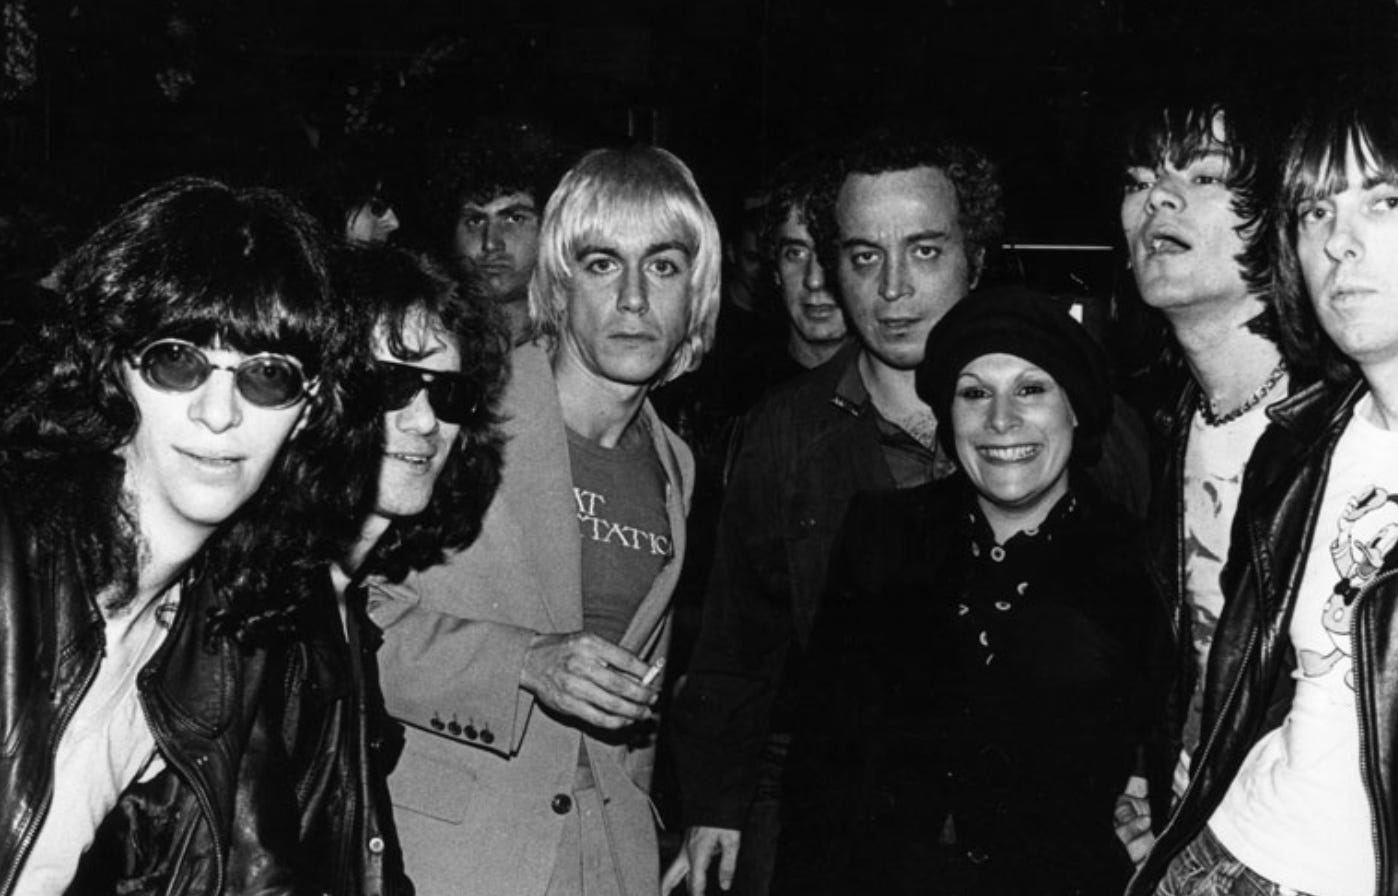 Seymour Stein with the Ramones, Iggy Pop, Linda Stein and Danny Fields in the background.